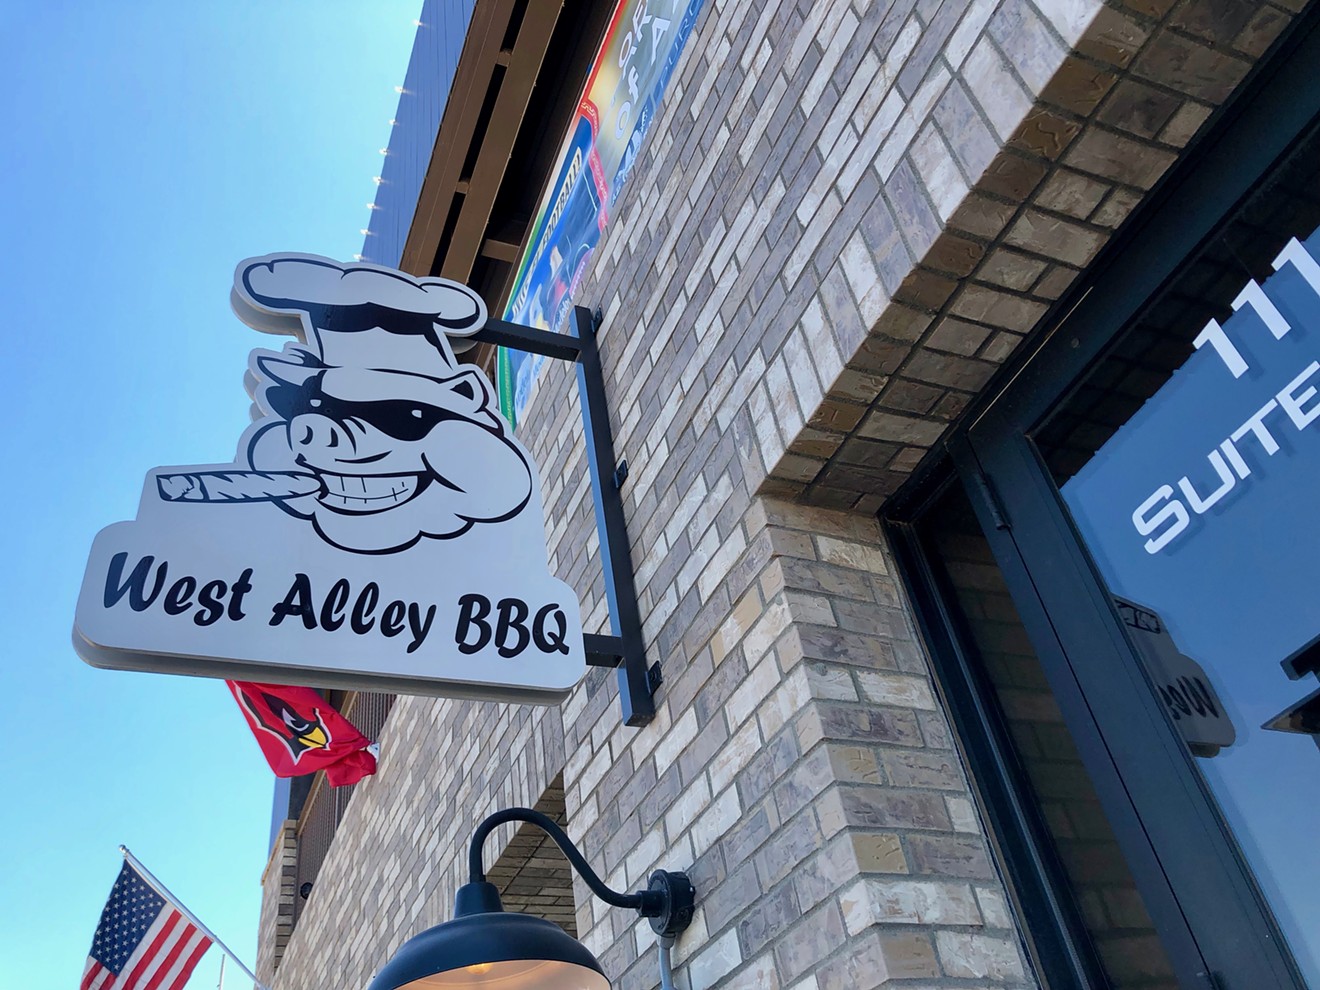 West Alley BBQ in downtown Chandler is just one of the Valley's black-owned businesses being featured on restaurant guides.